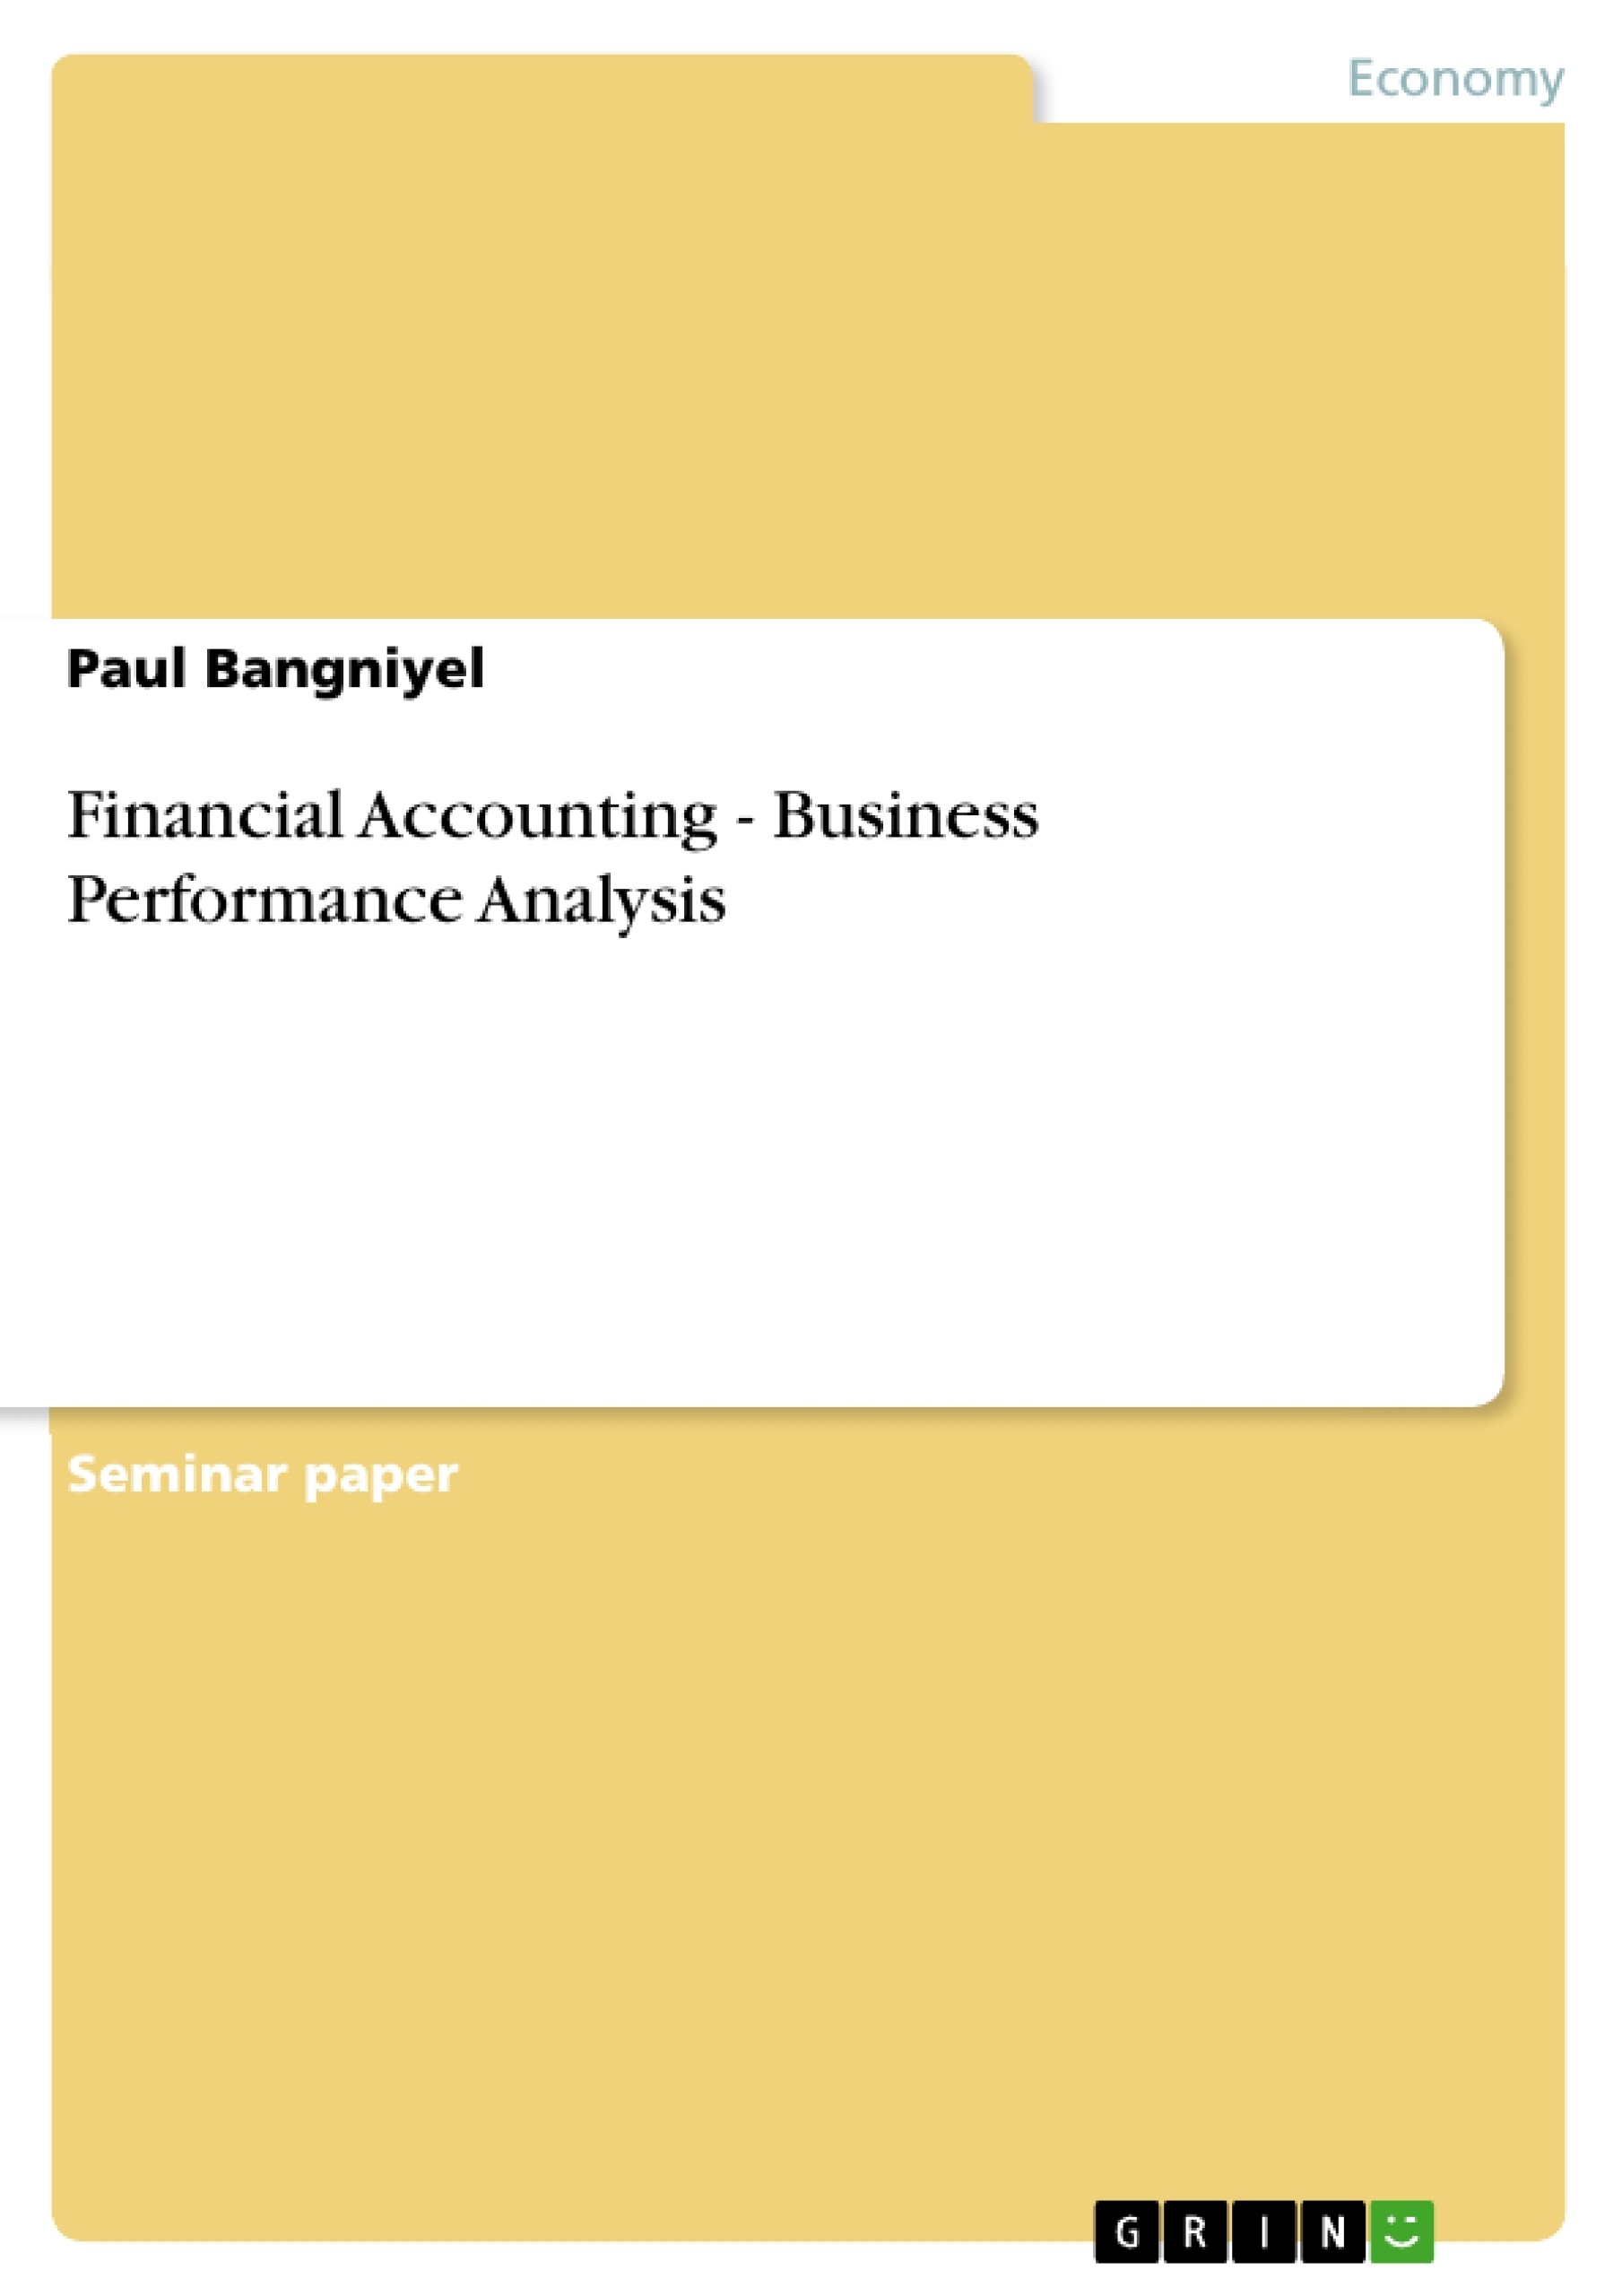 Title: Financial Accounting - Business Performance Analysis